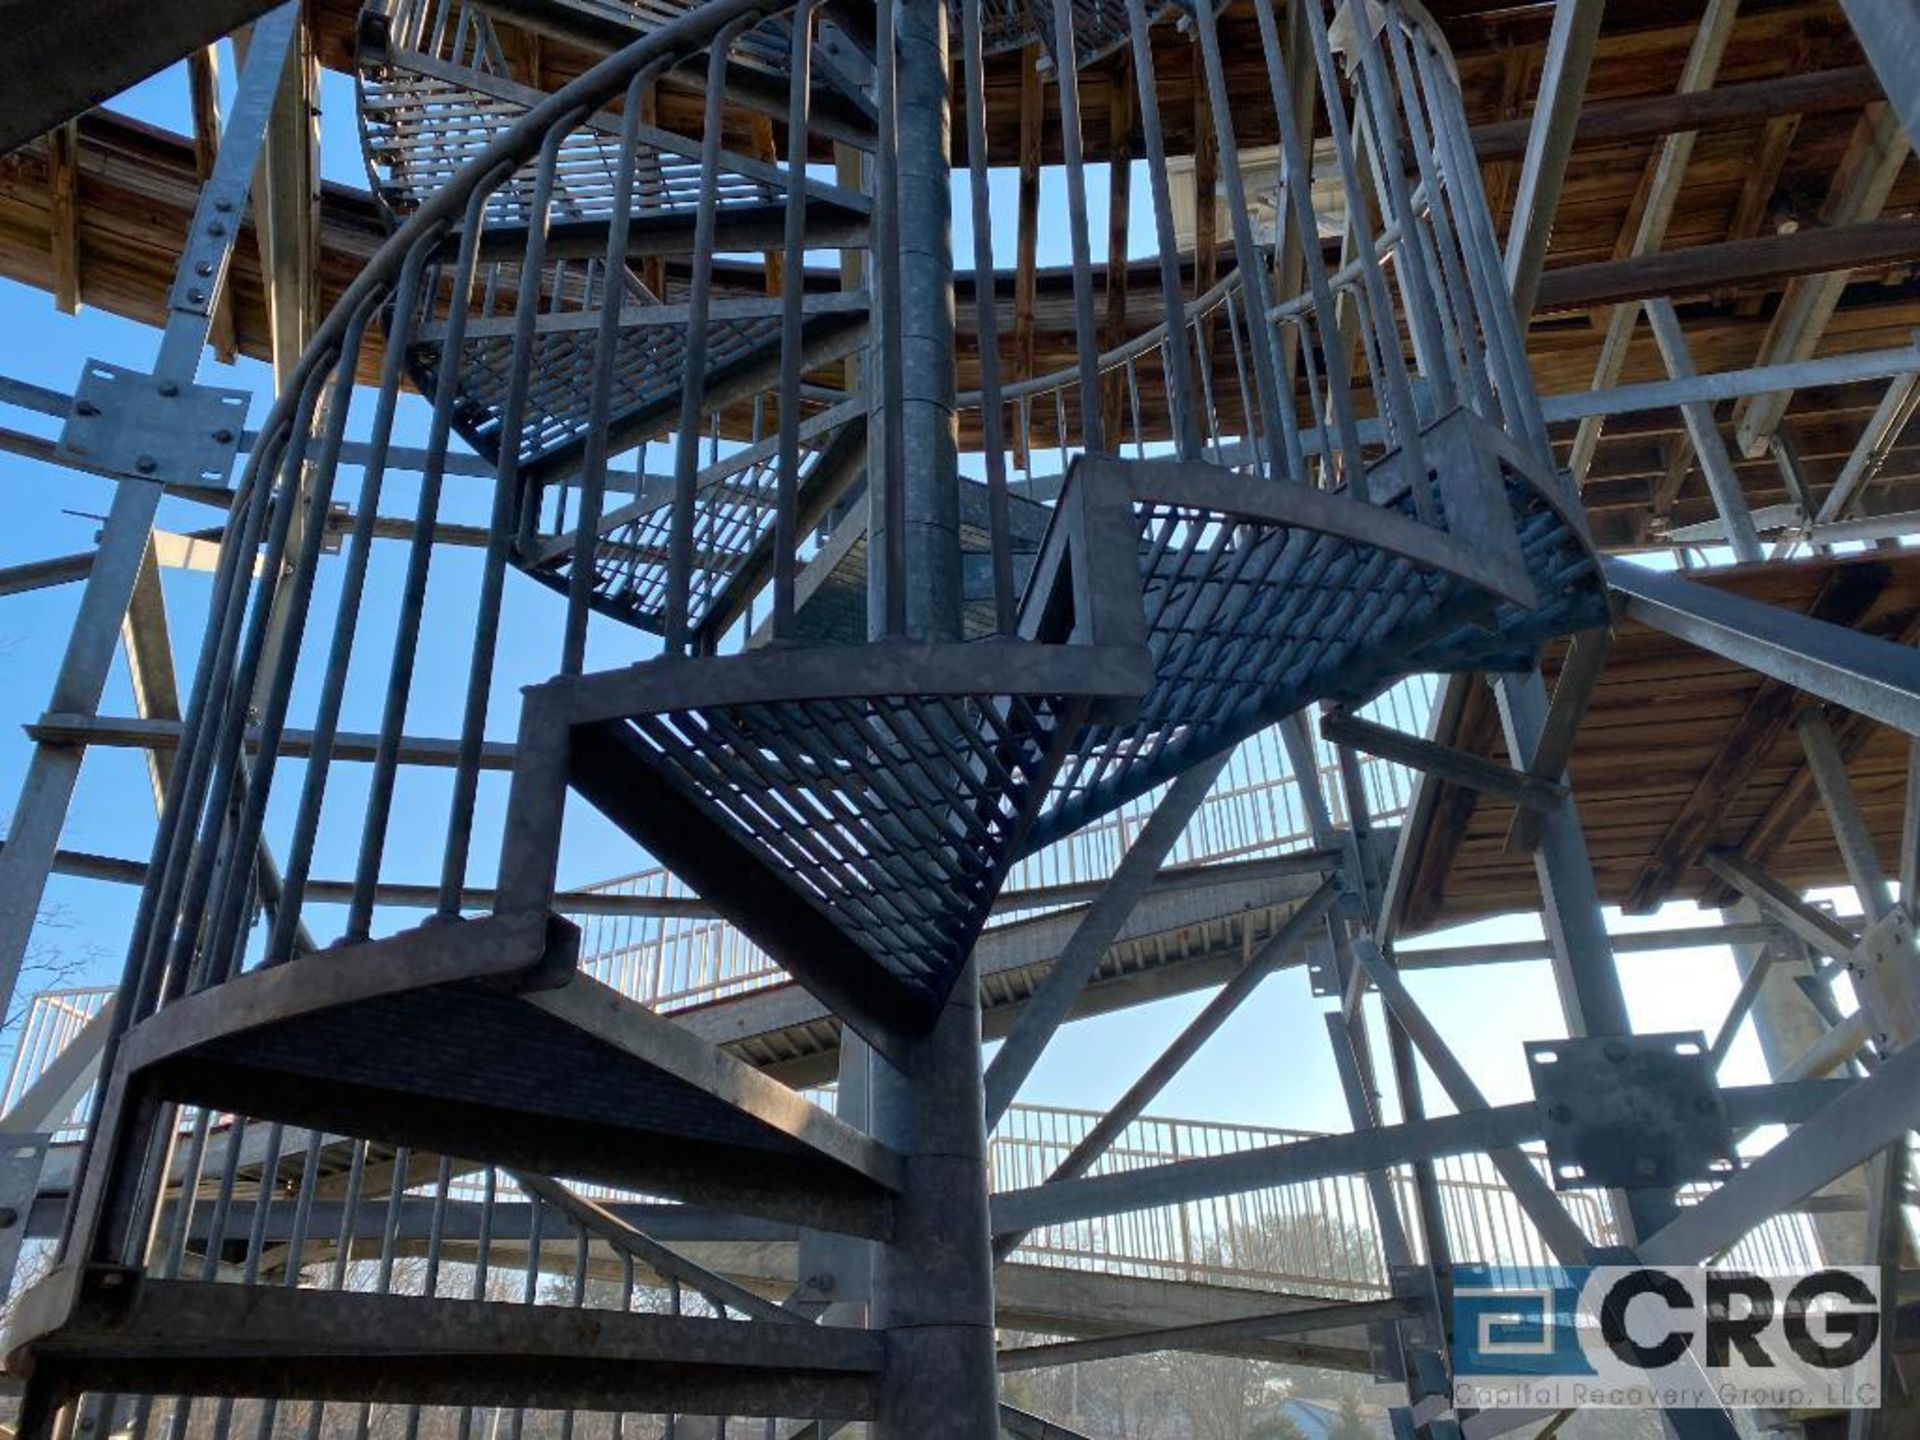 Hell Cat wood deck roller coaster, all galvanized steel structure frame, new in 2005, including - Image 7 of 9